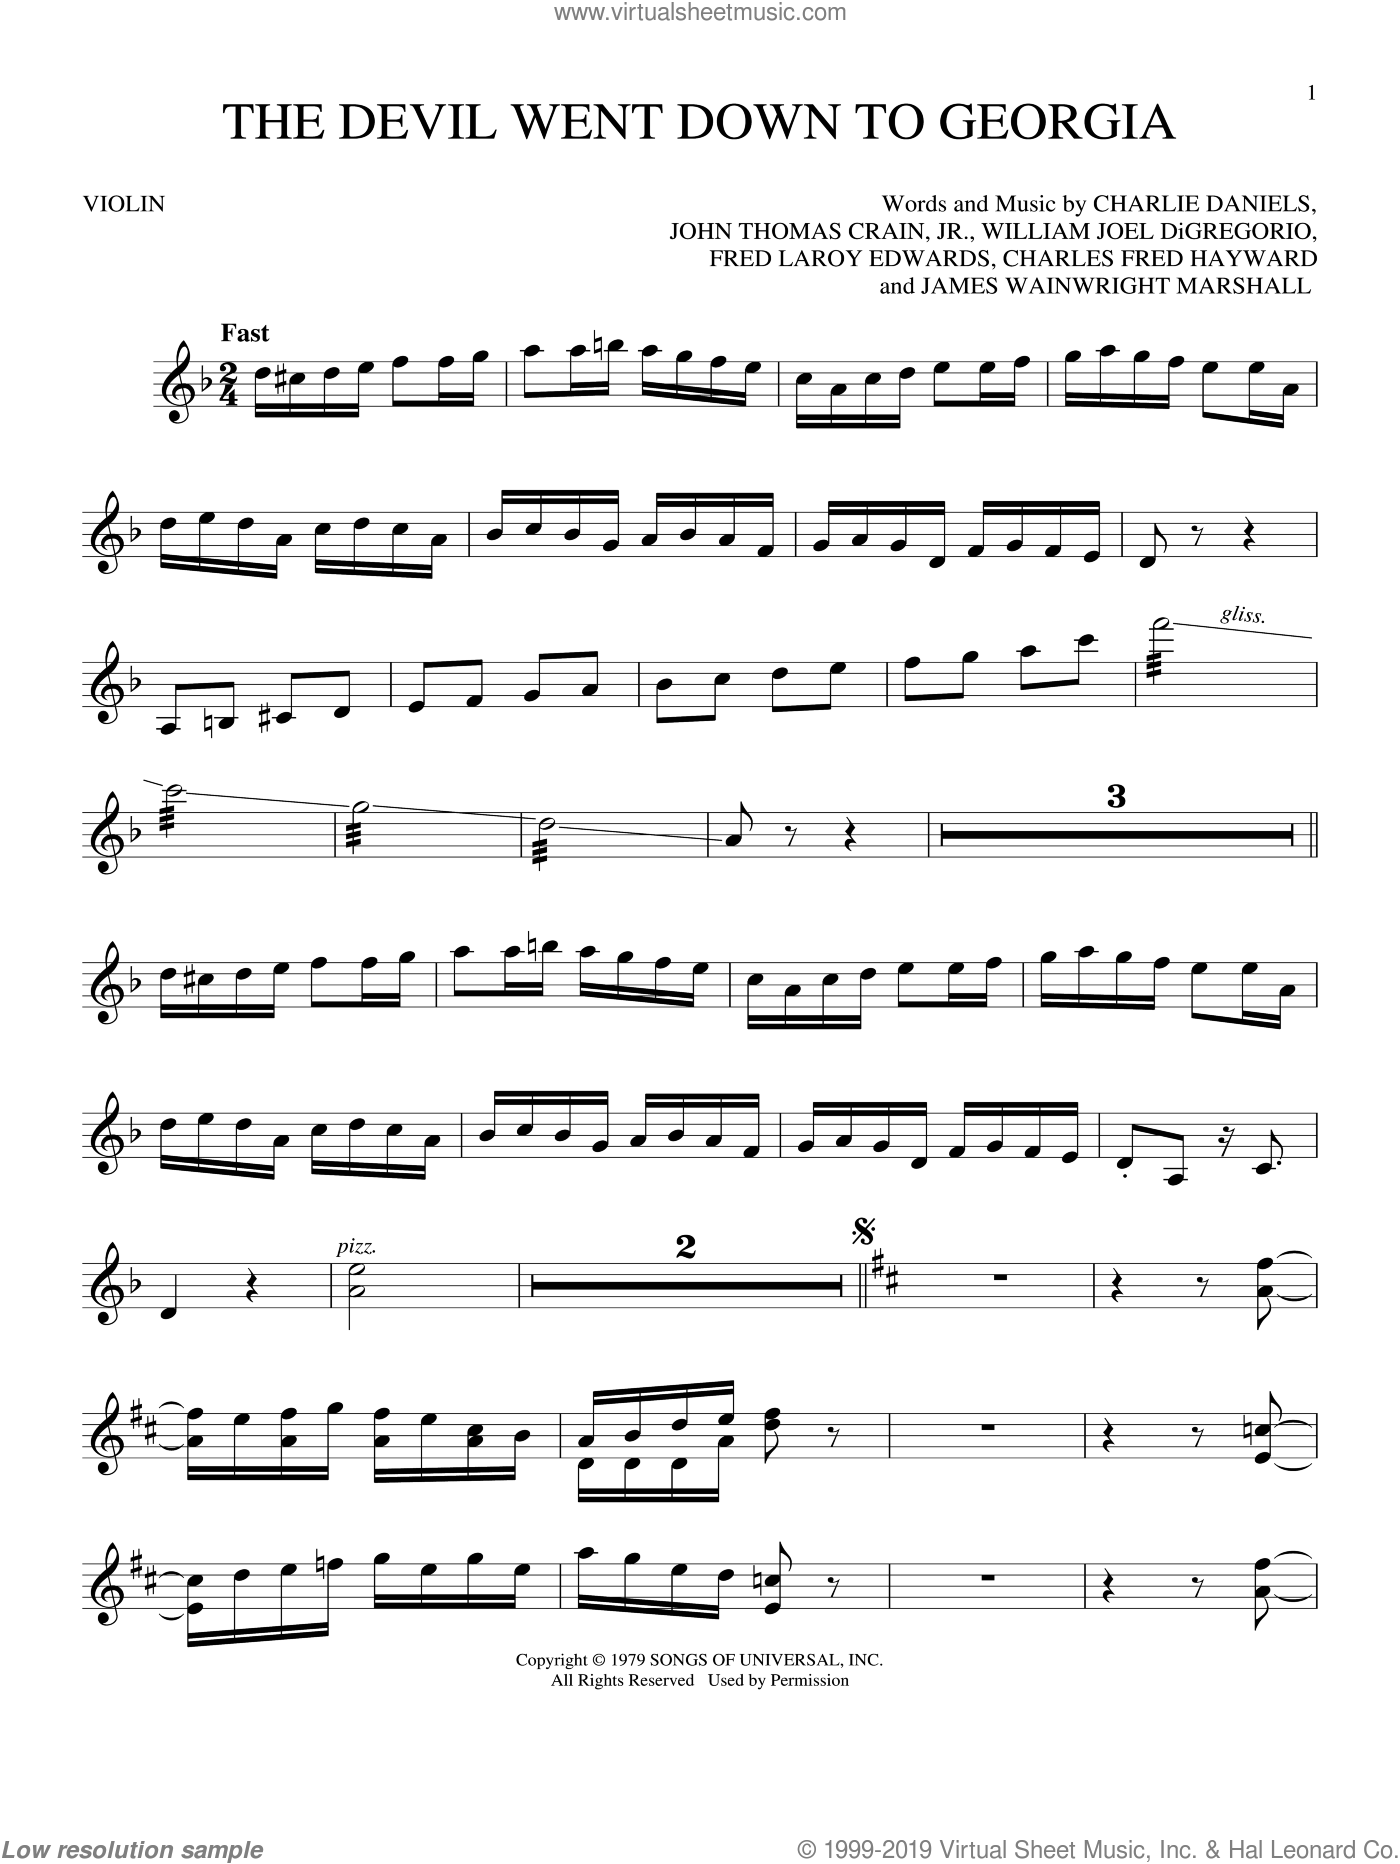 Band - The Devil Went Down To Georgia sheet music for violin solo